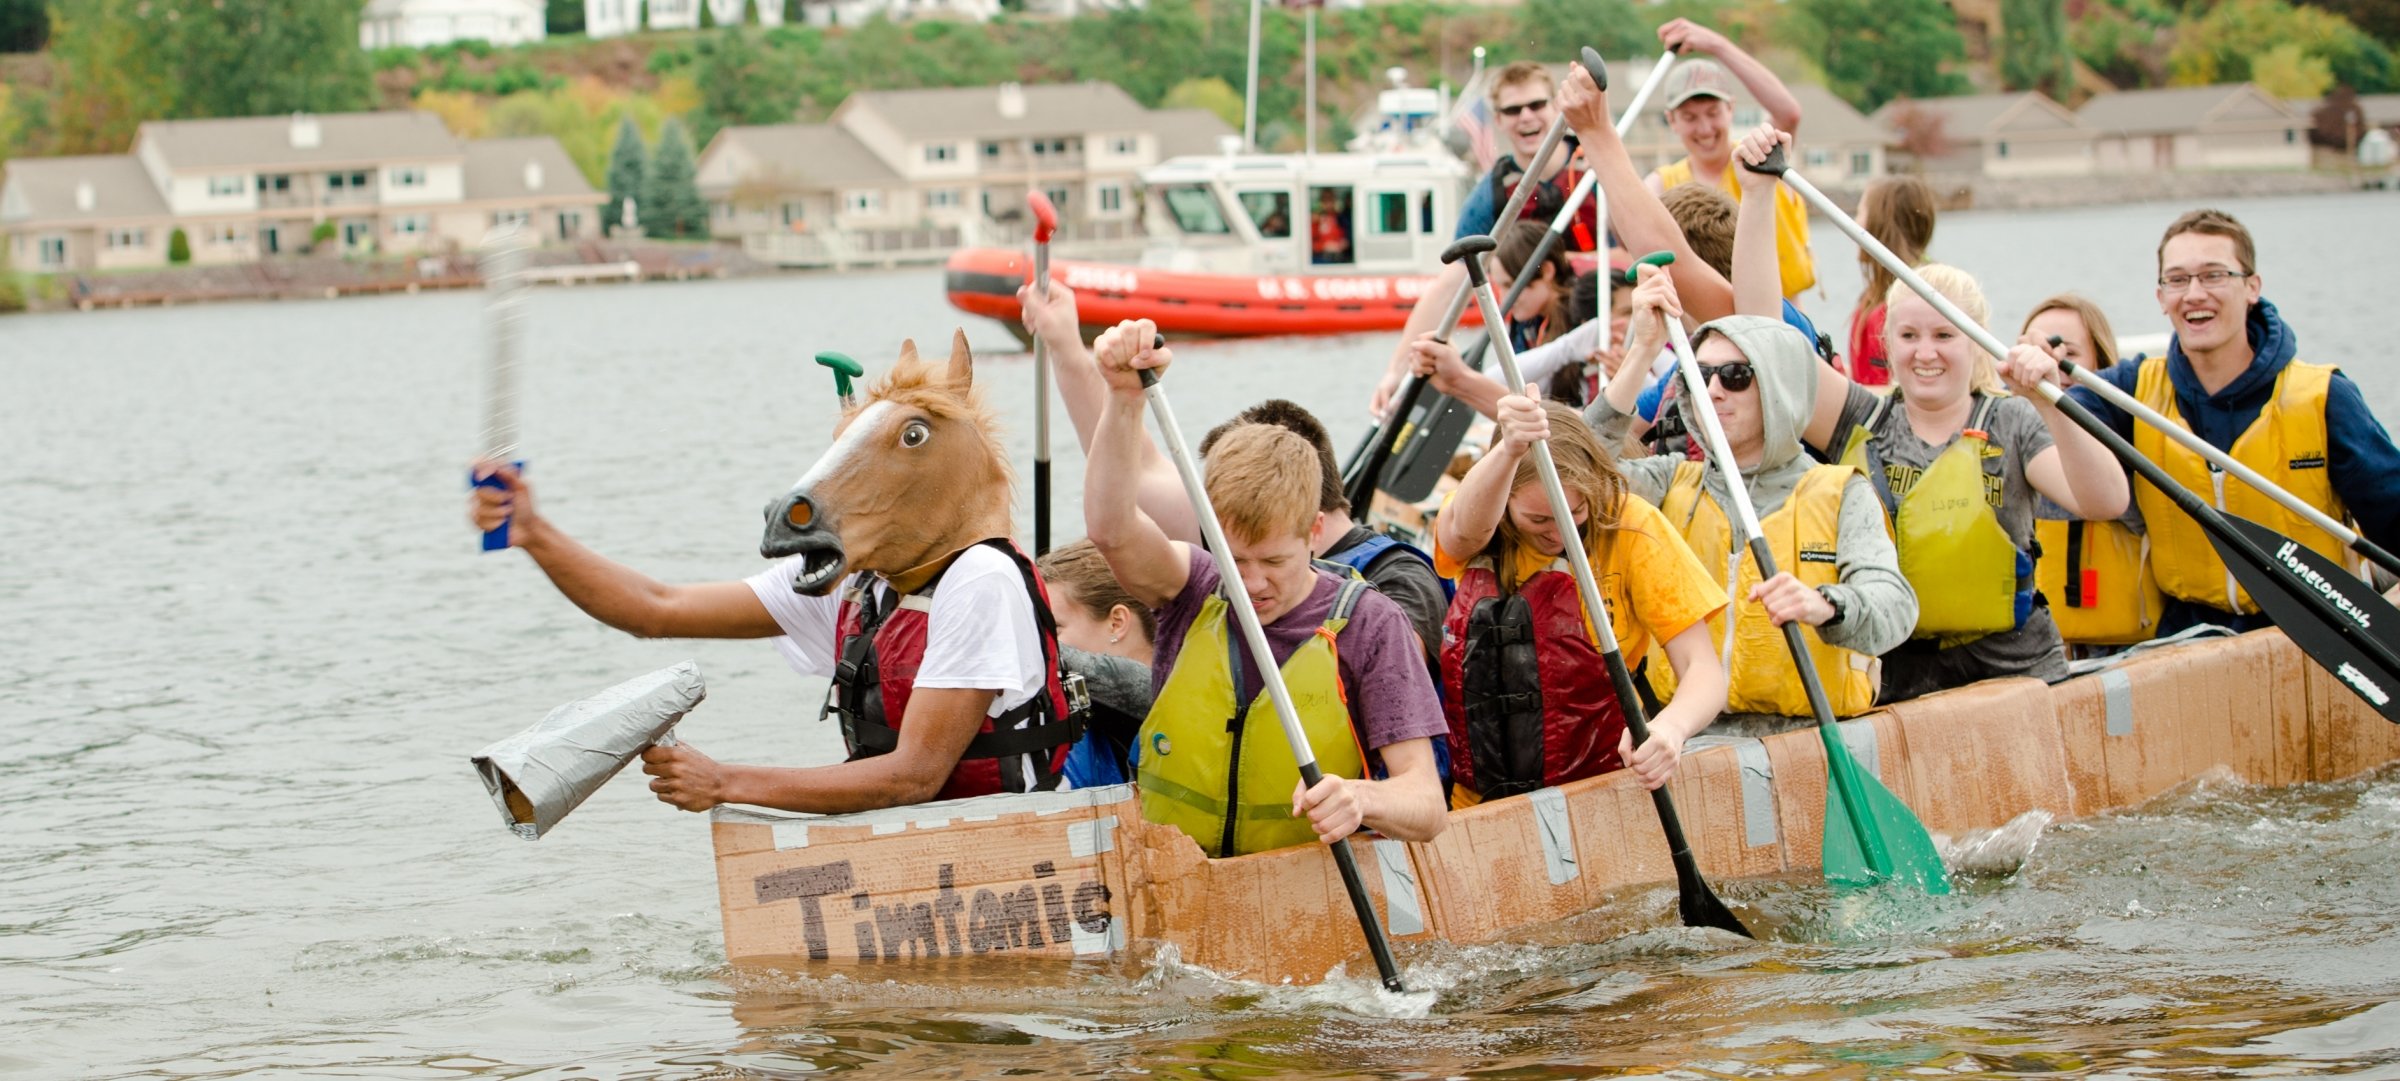 Students in a cardboard boat on the water.